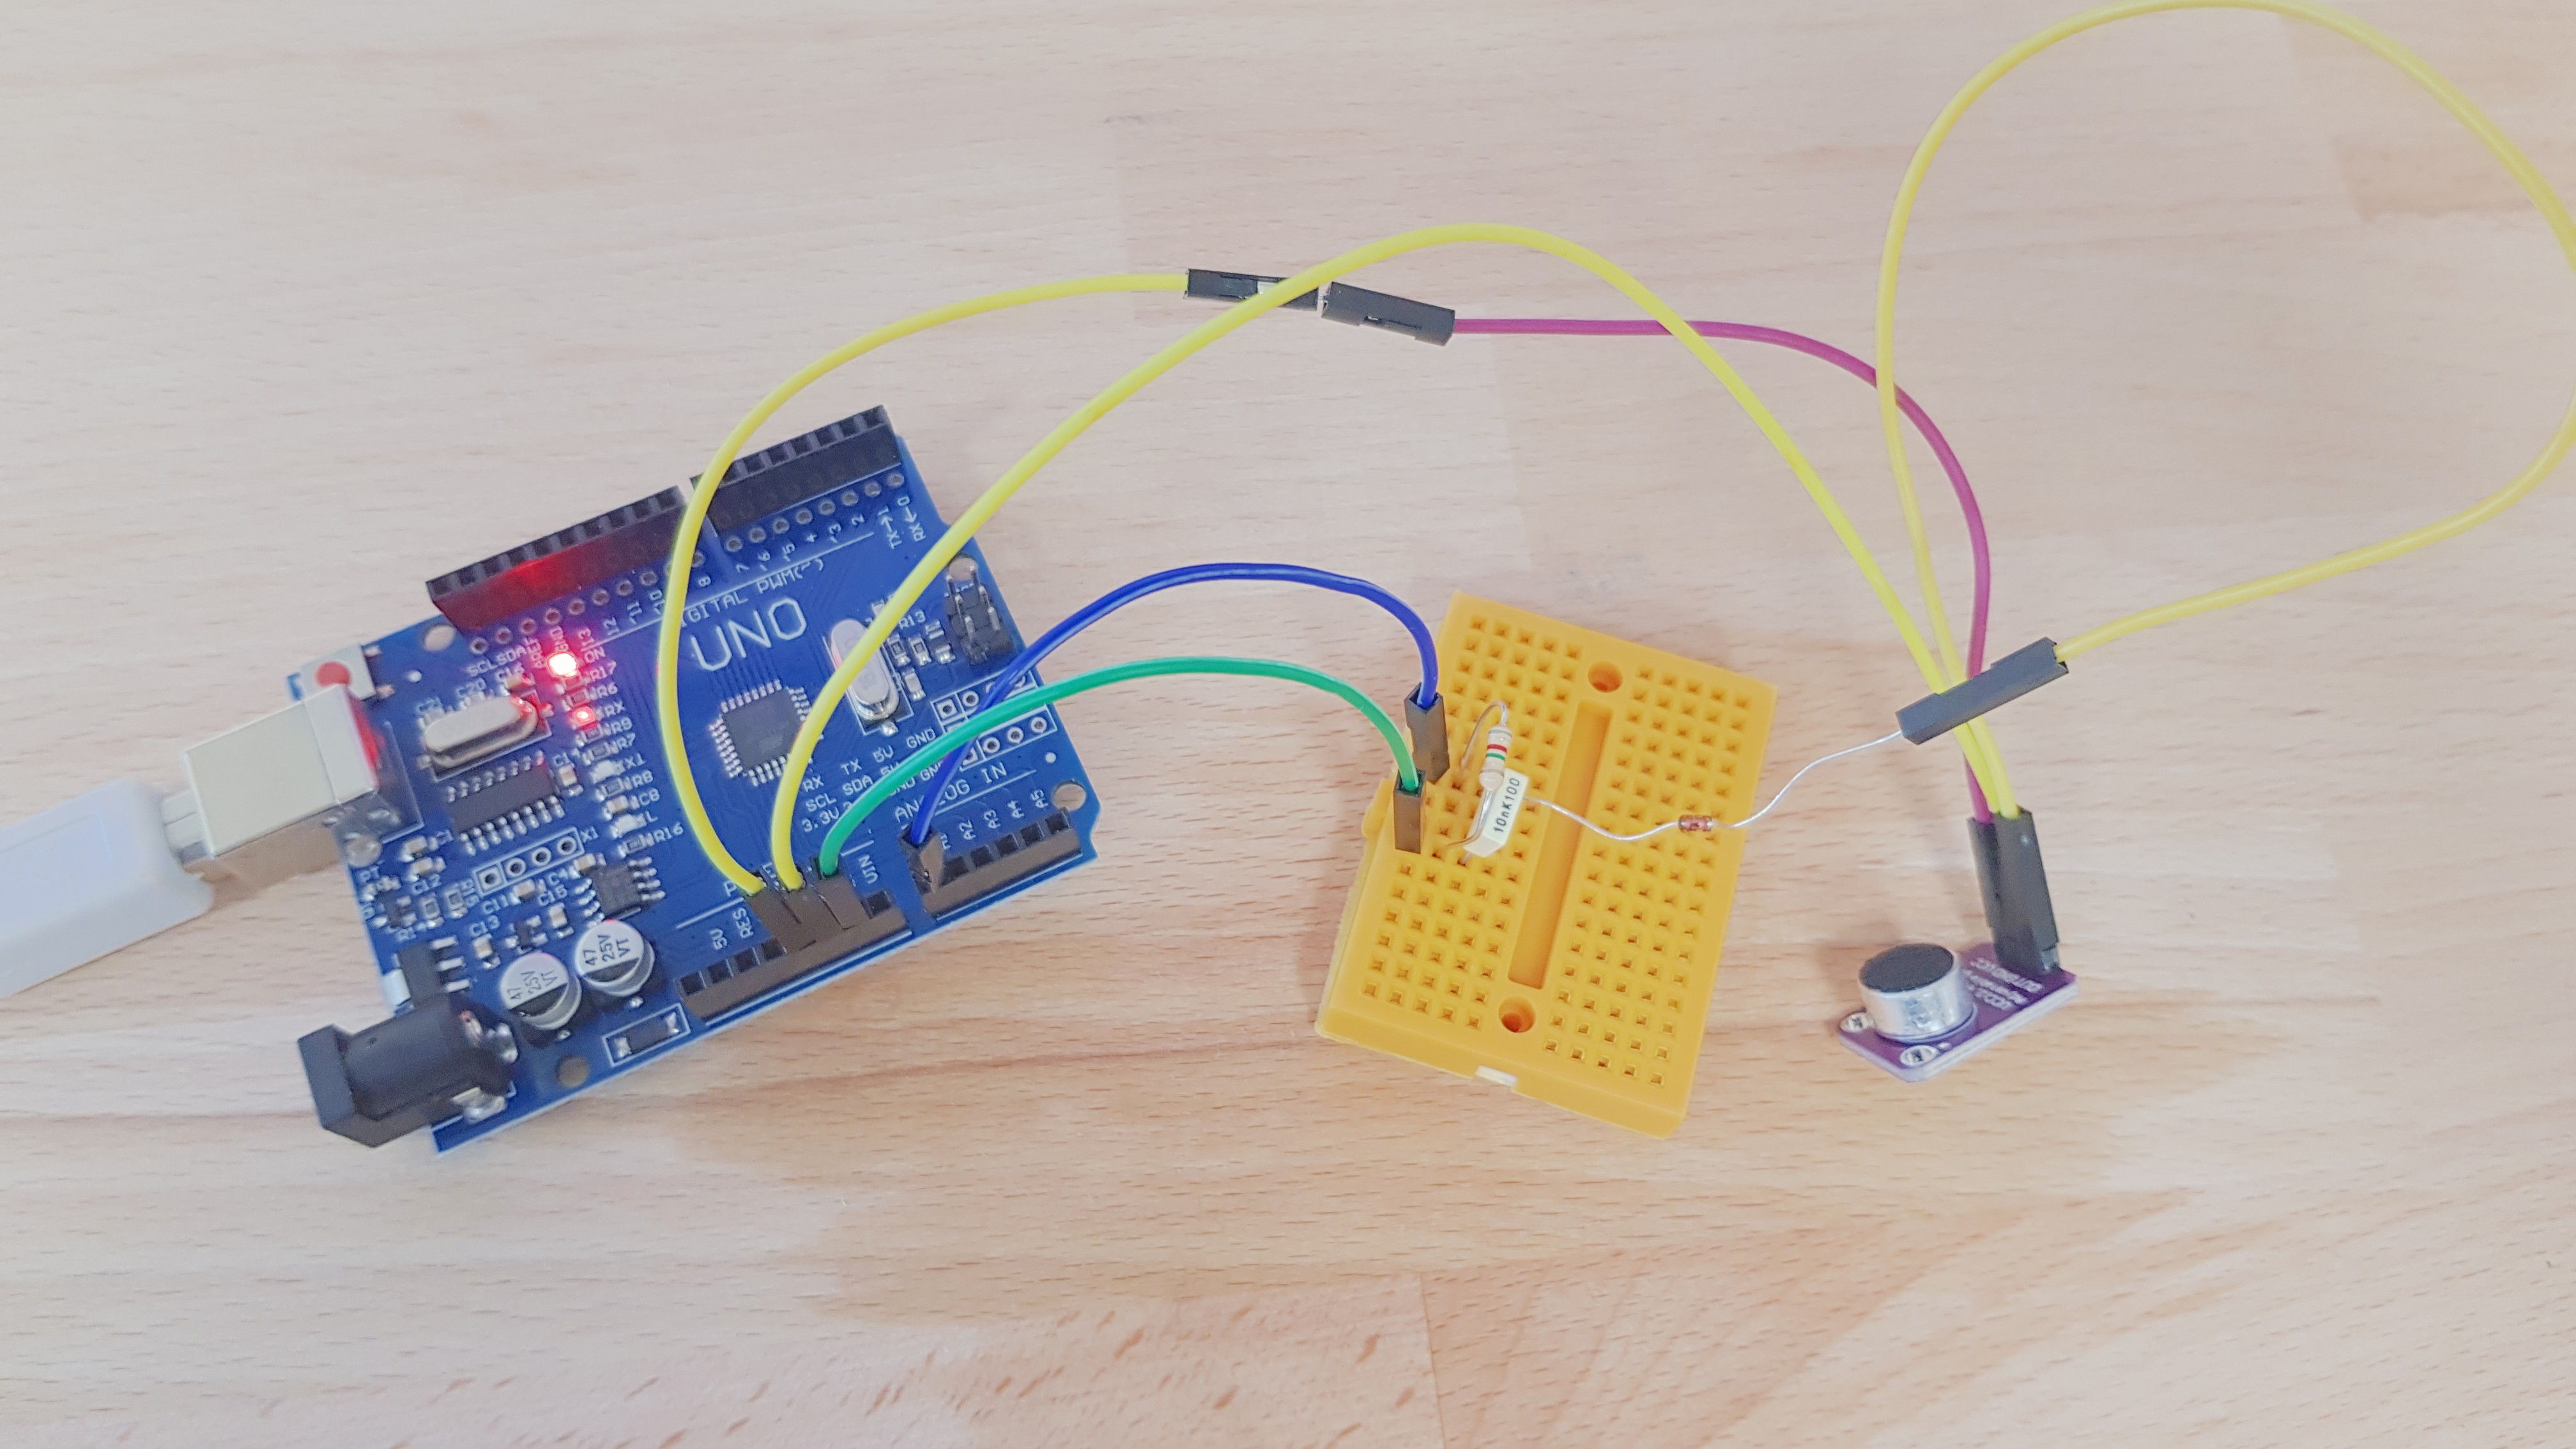 Connected with breadboard